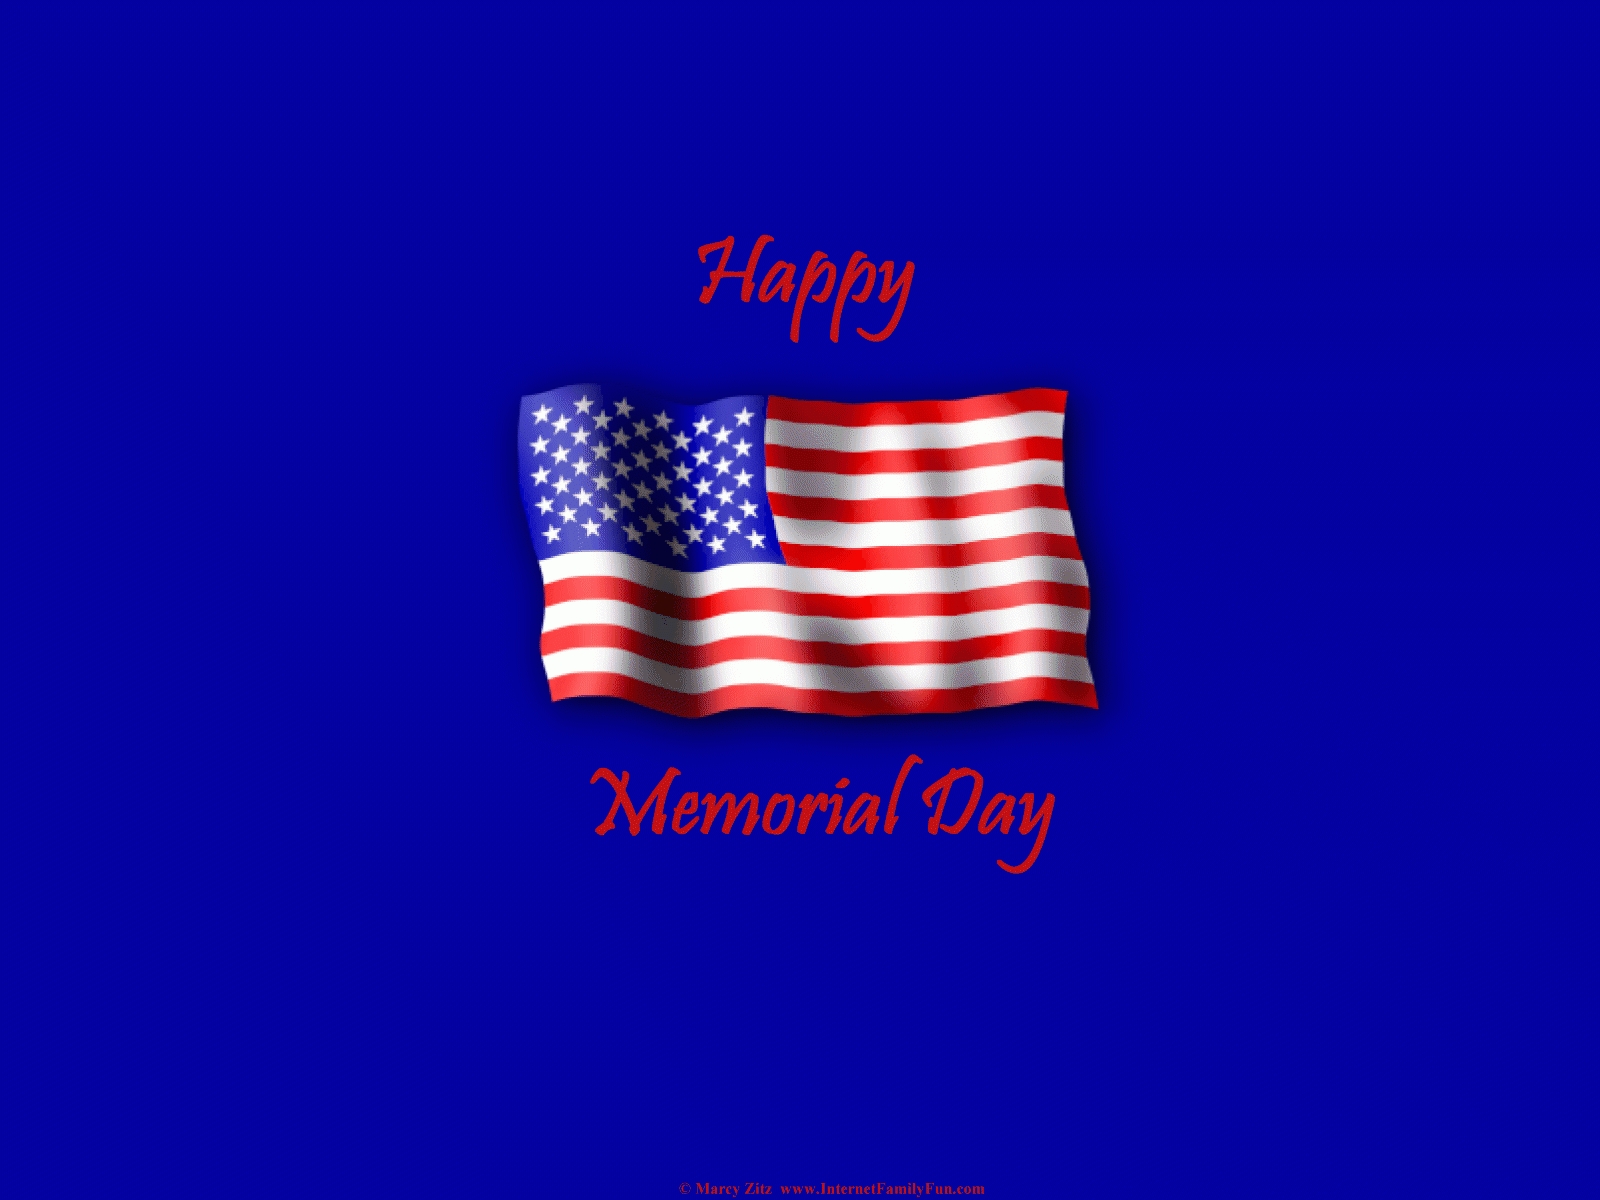 10 New Happy Memorial Day Wallpapers FULL HD 1920×1080 For PC Background